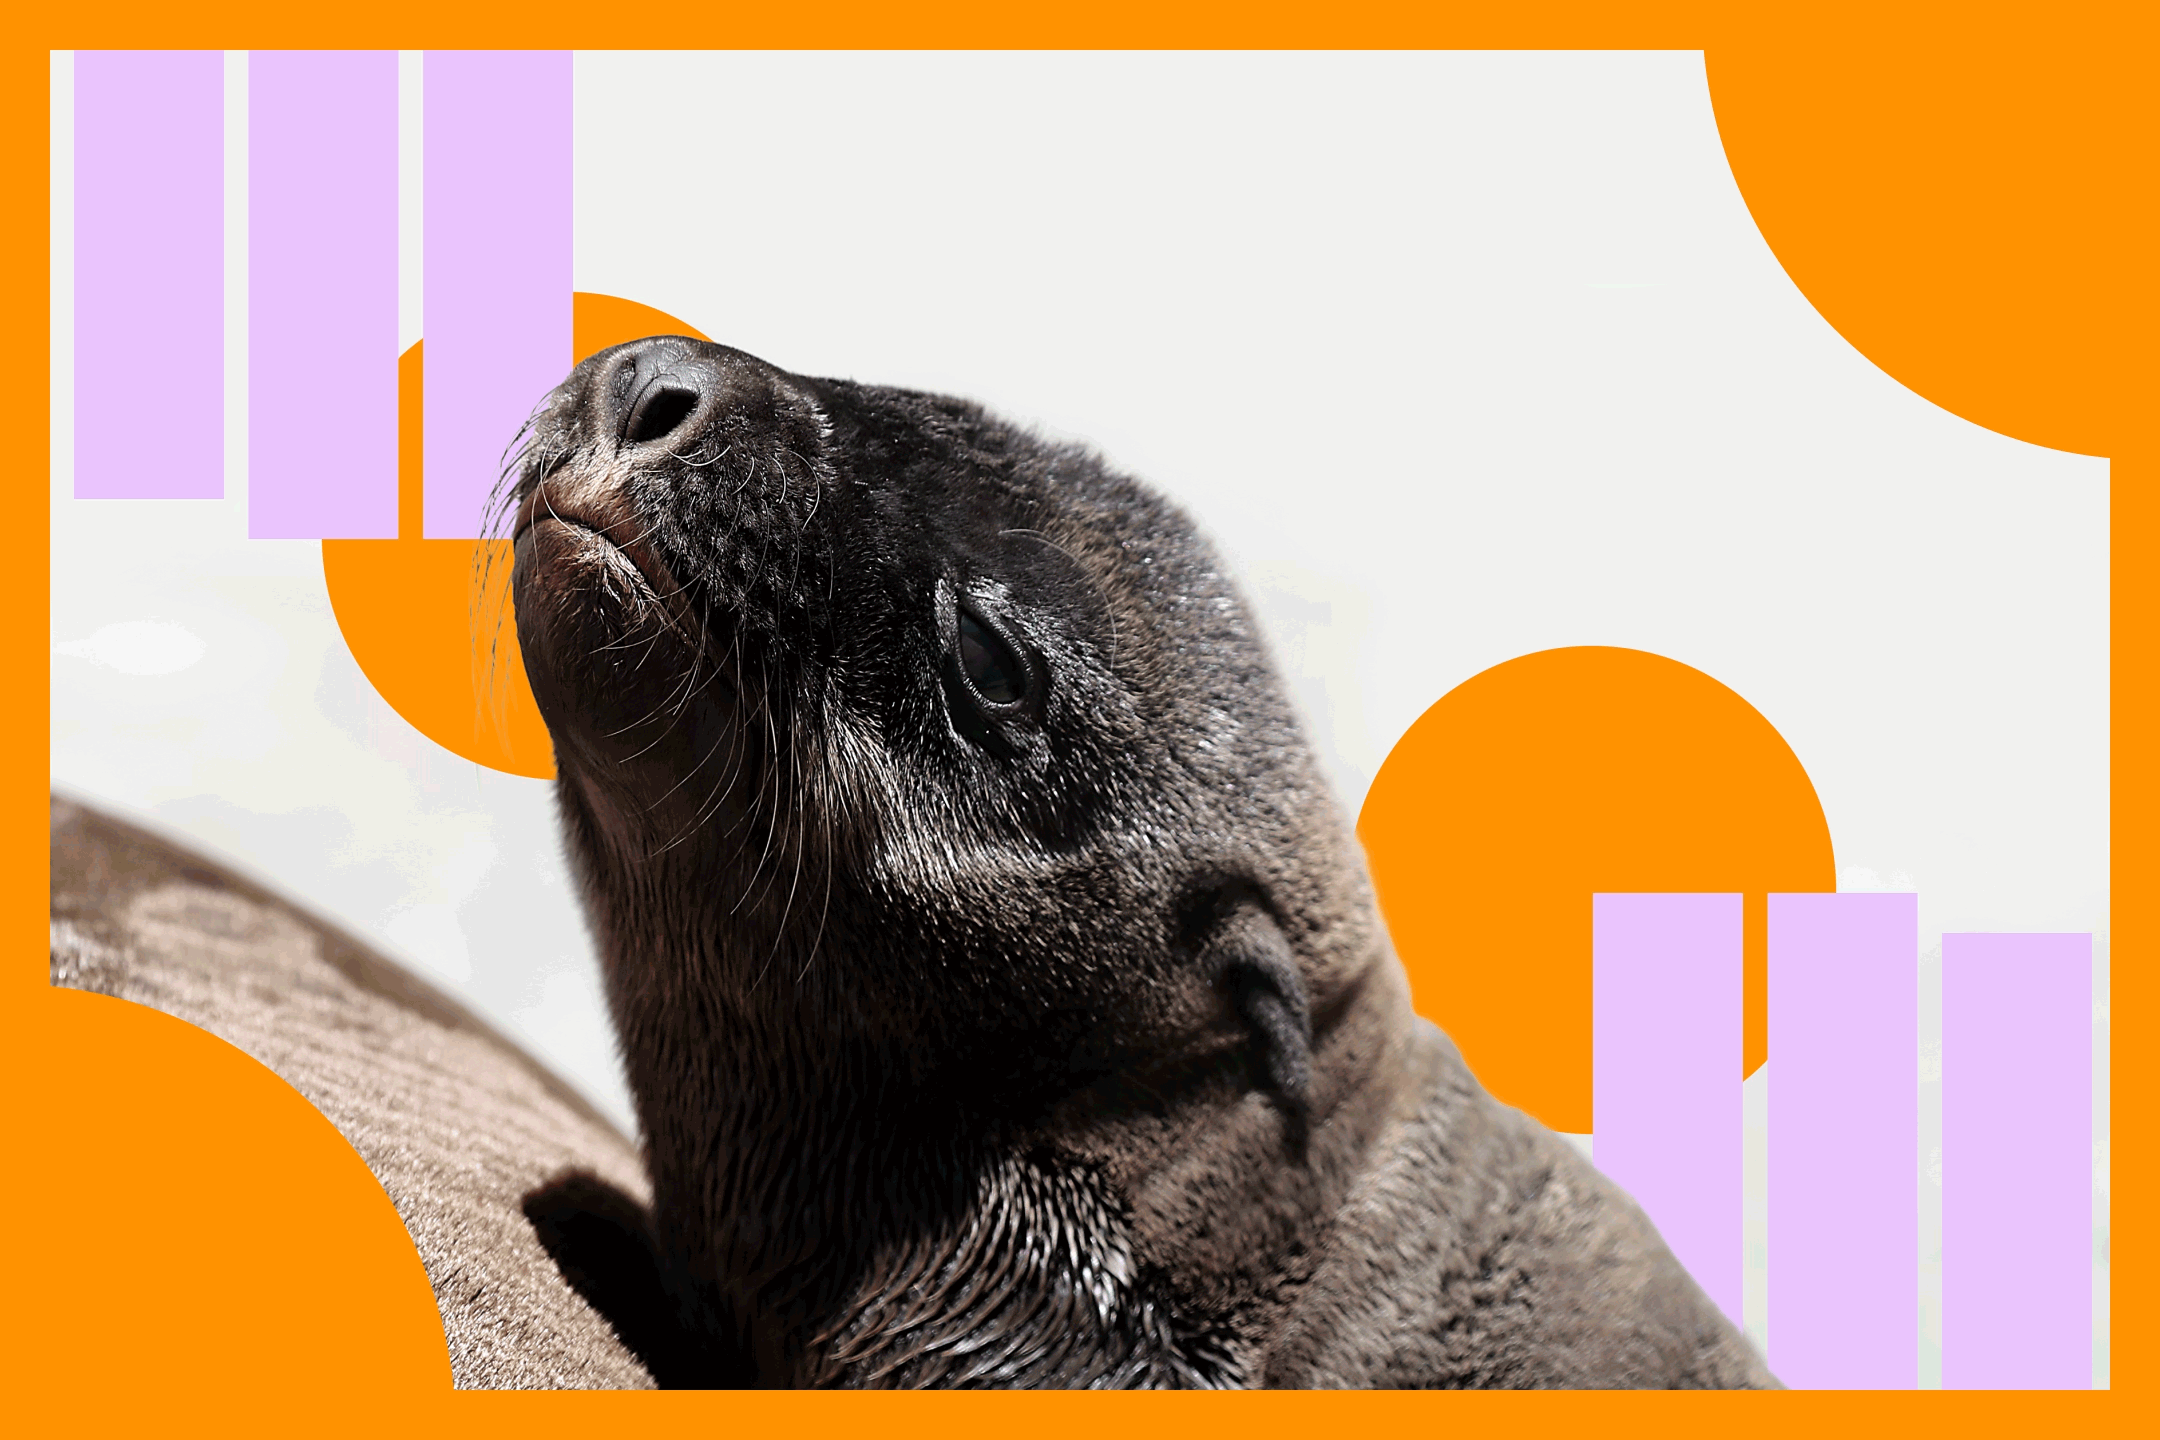 A sea lion pup with a moving orange and purple background.